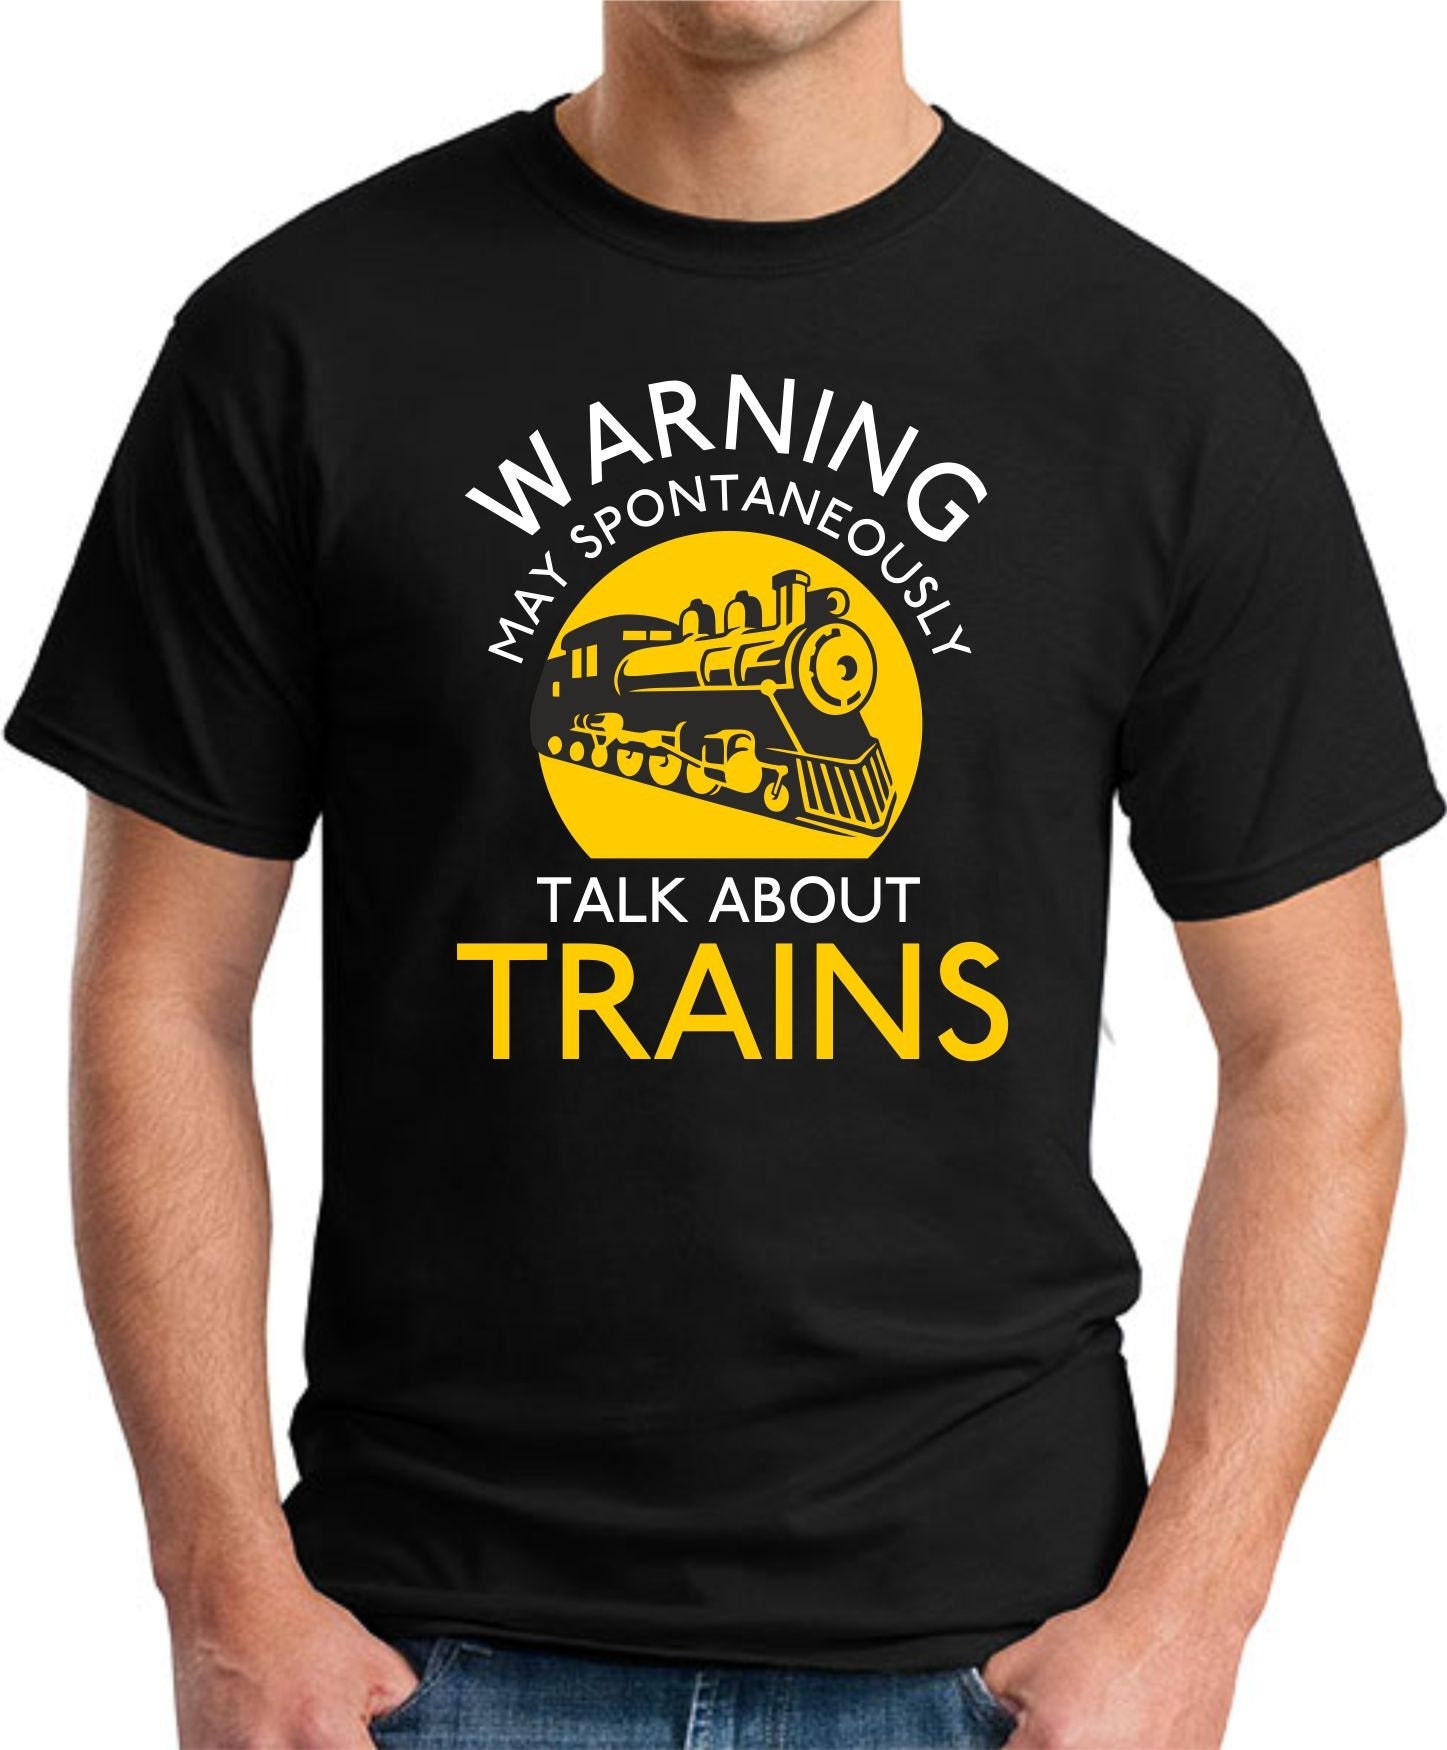 Warning May Spontaneously Talk About Trains T-Shirt - Men’s Printed Small-2xlarge